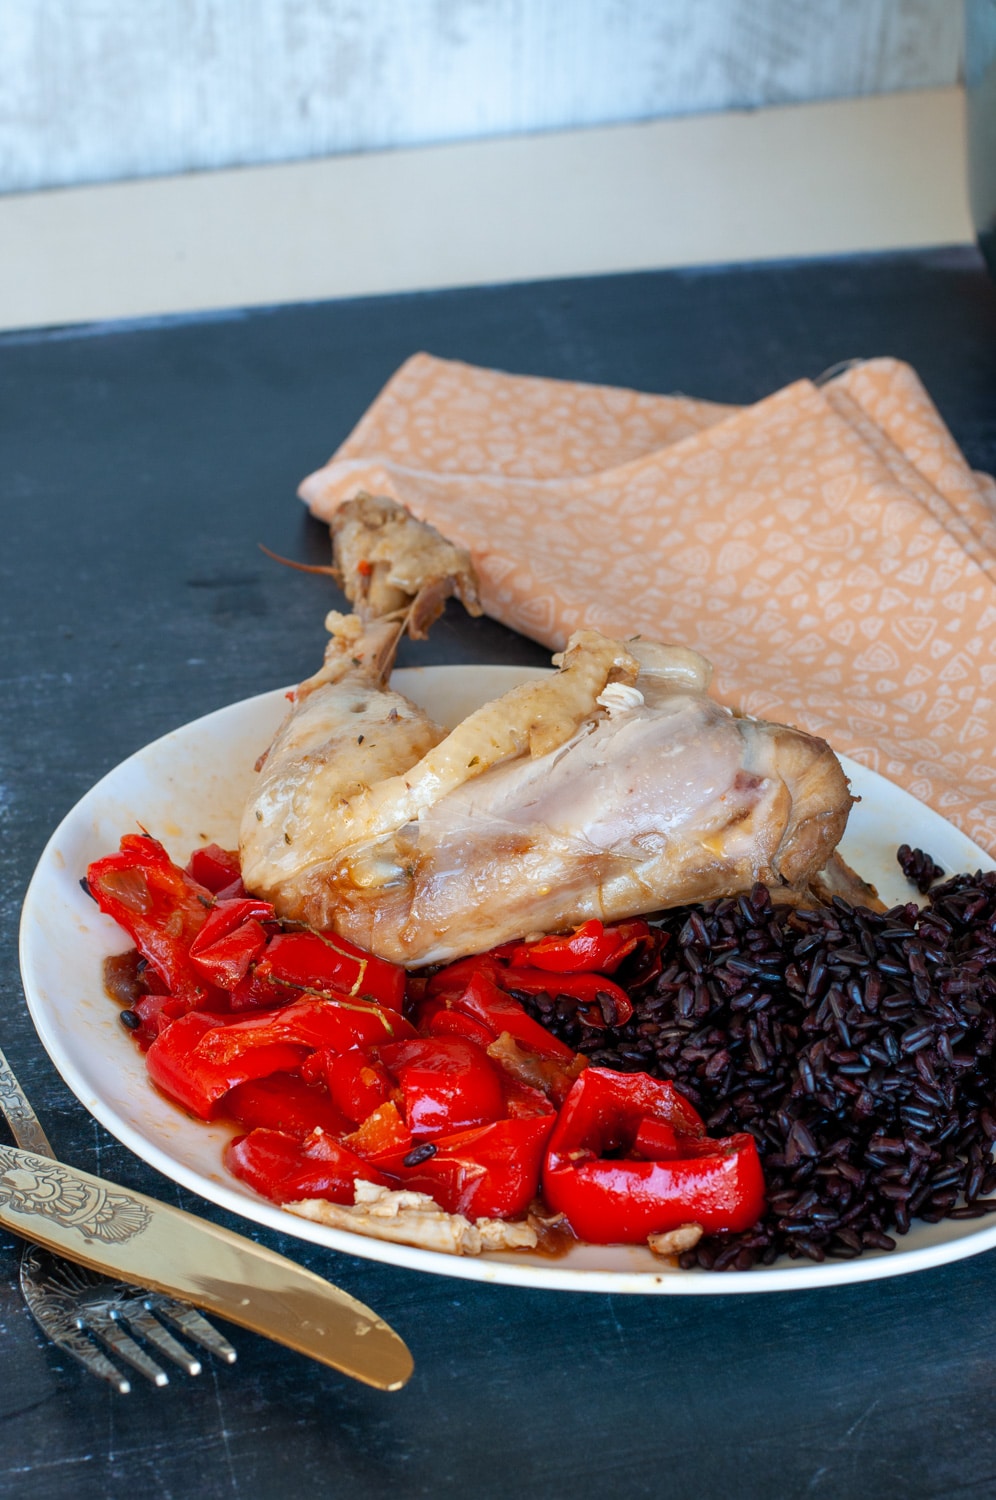 Chicken with peppers served with black rice
